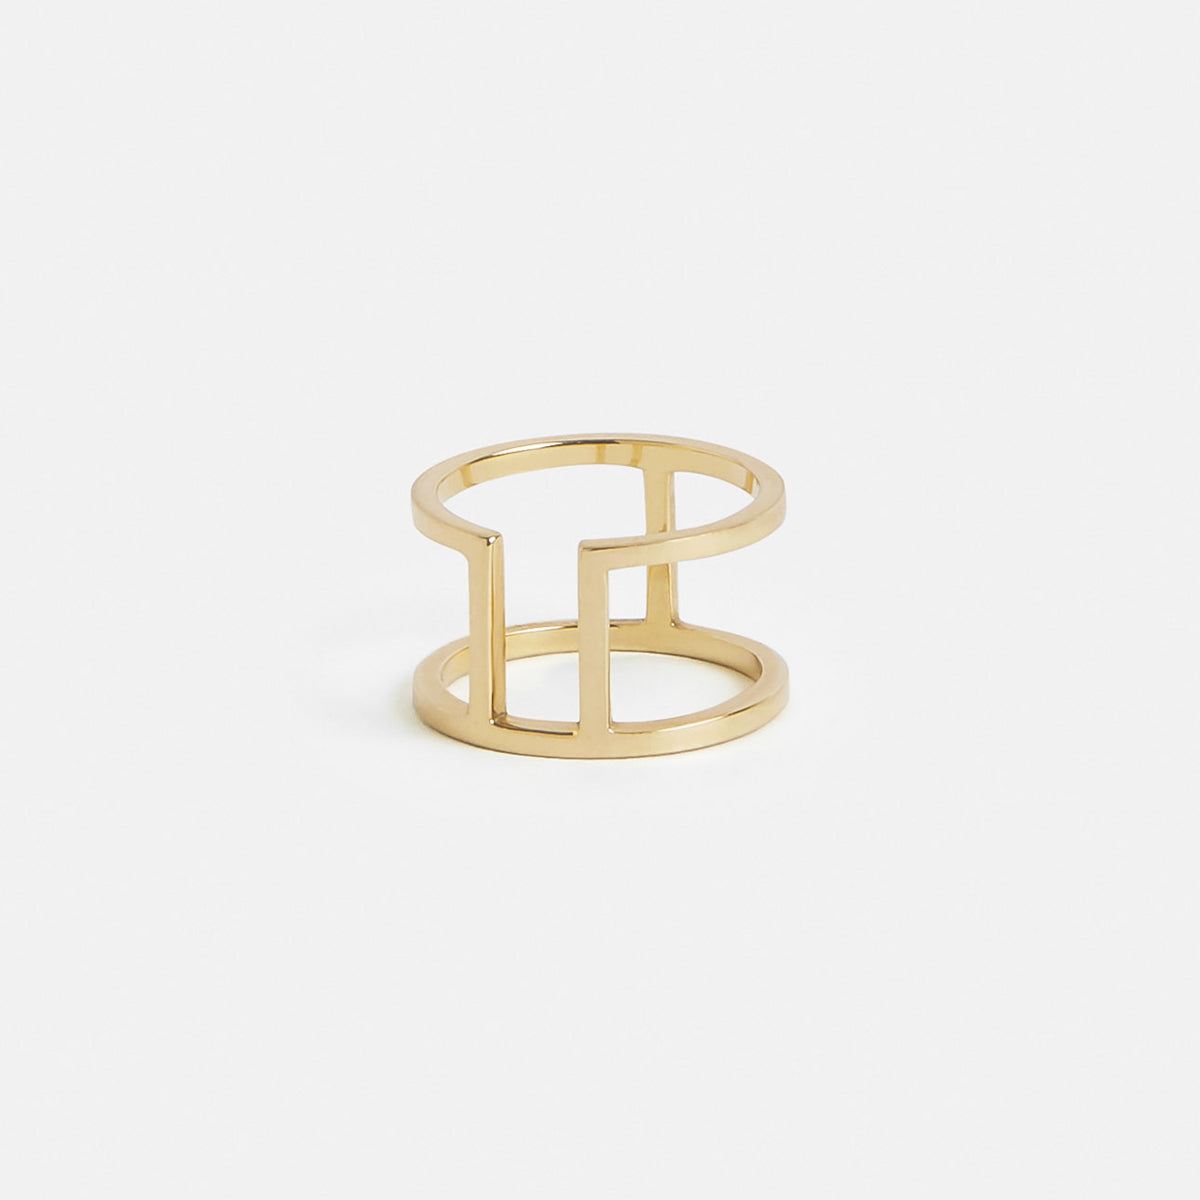 Cote Unisex Ring in 14k Gold by SHW Fine Jewelry New York City